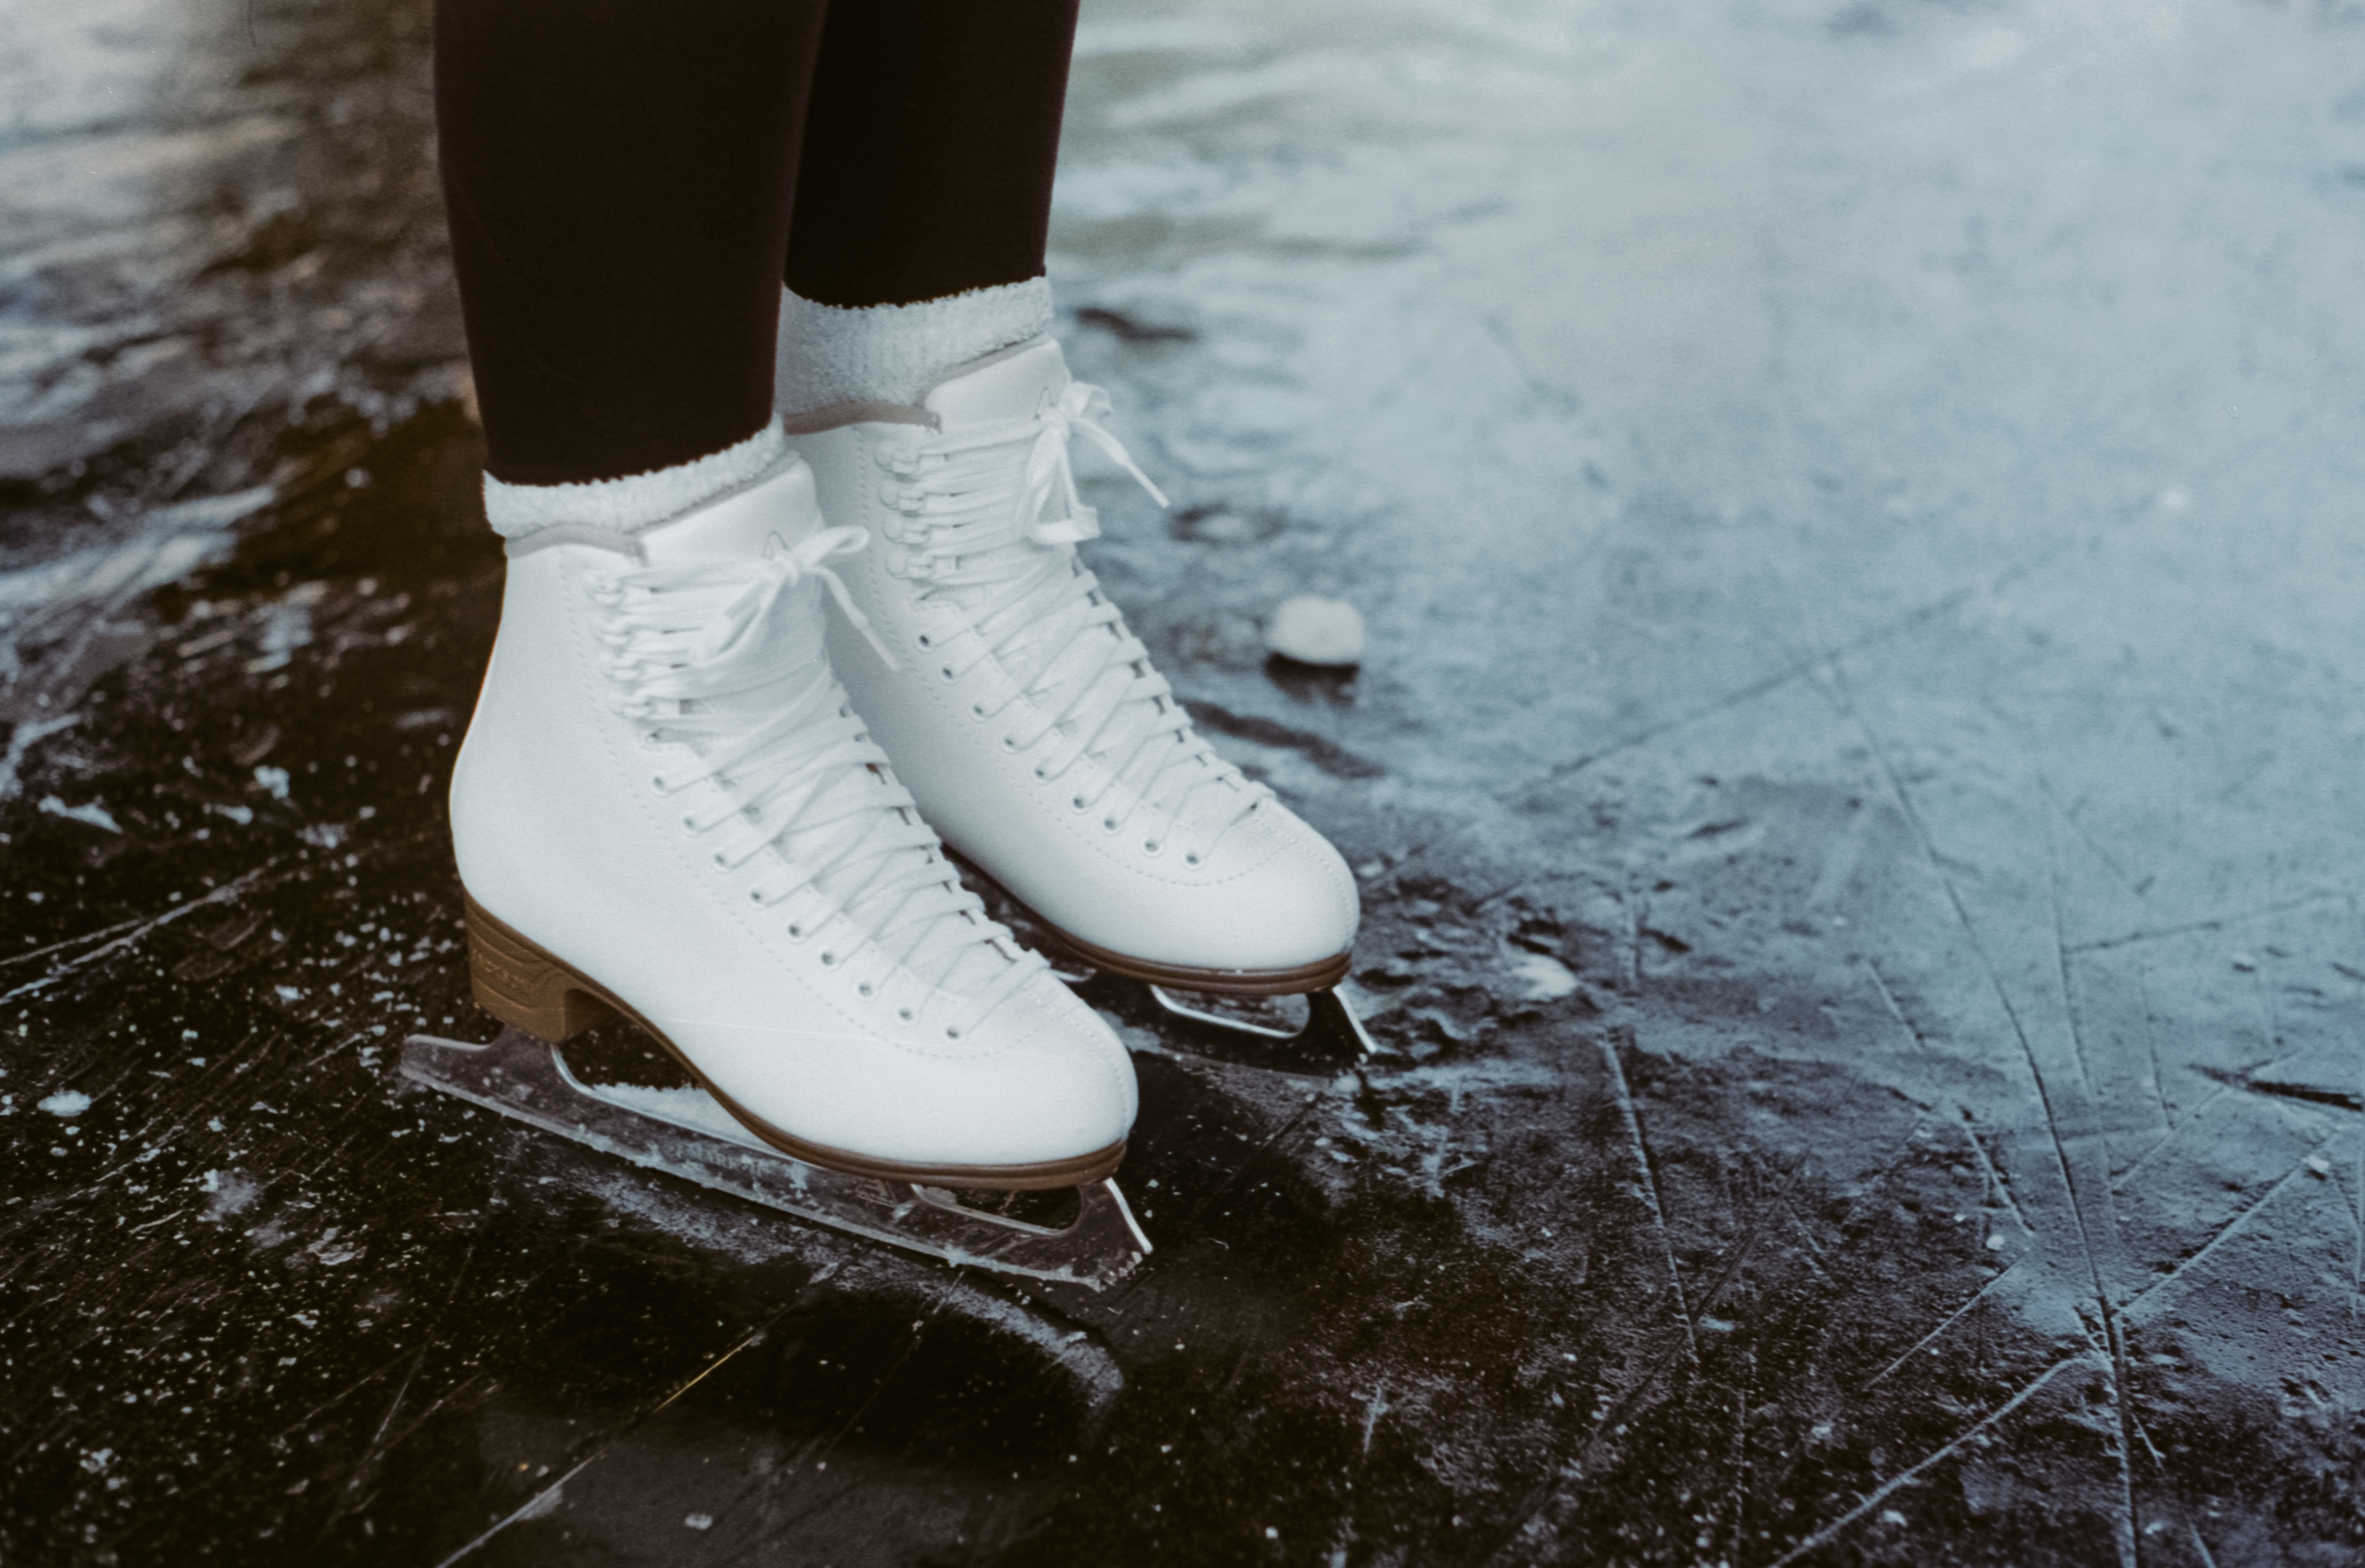 picture of someone on ice skates in ice but only showing their shoes 